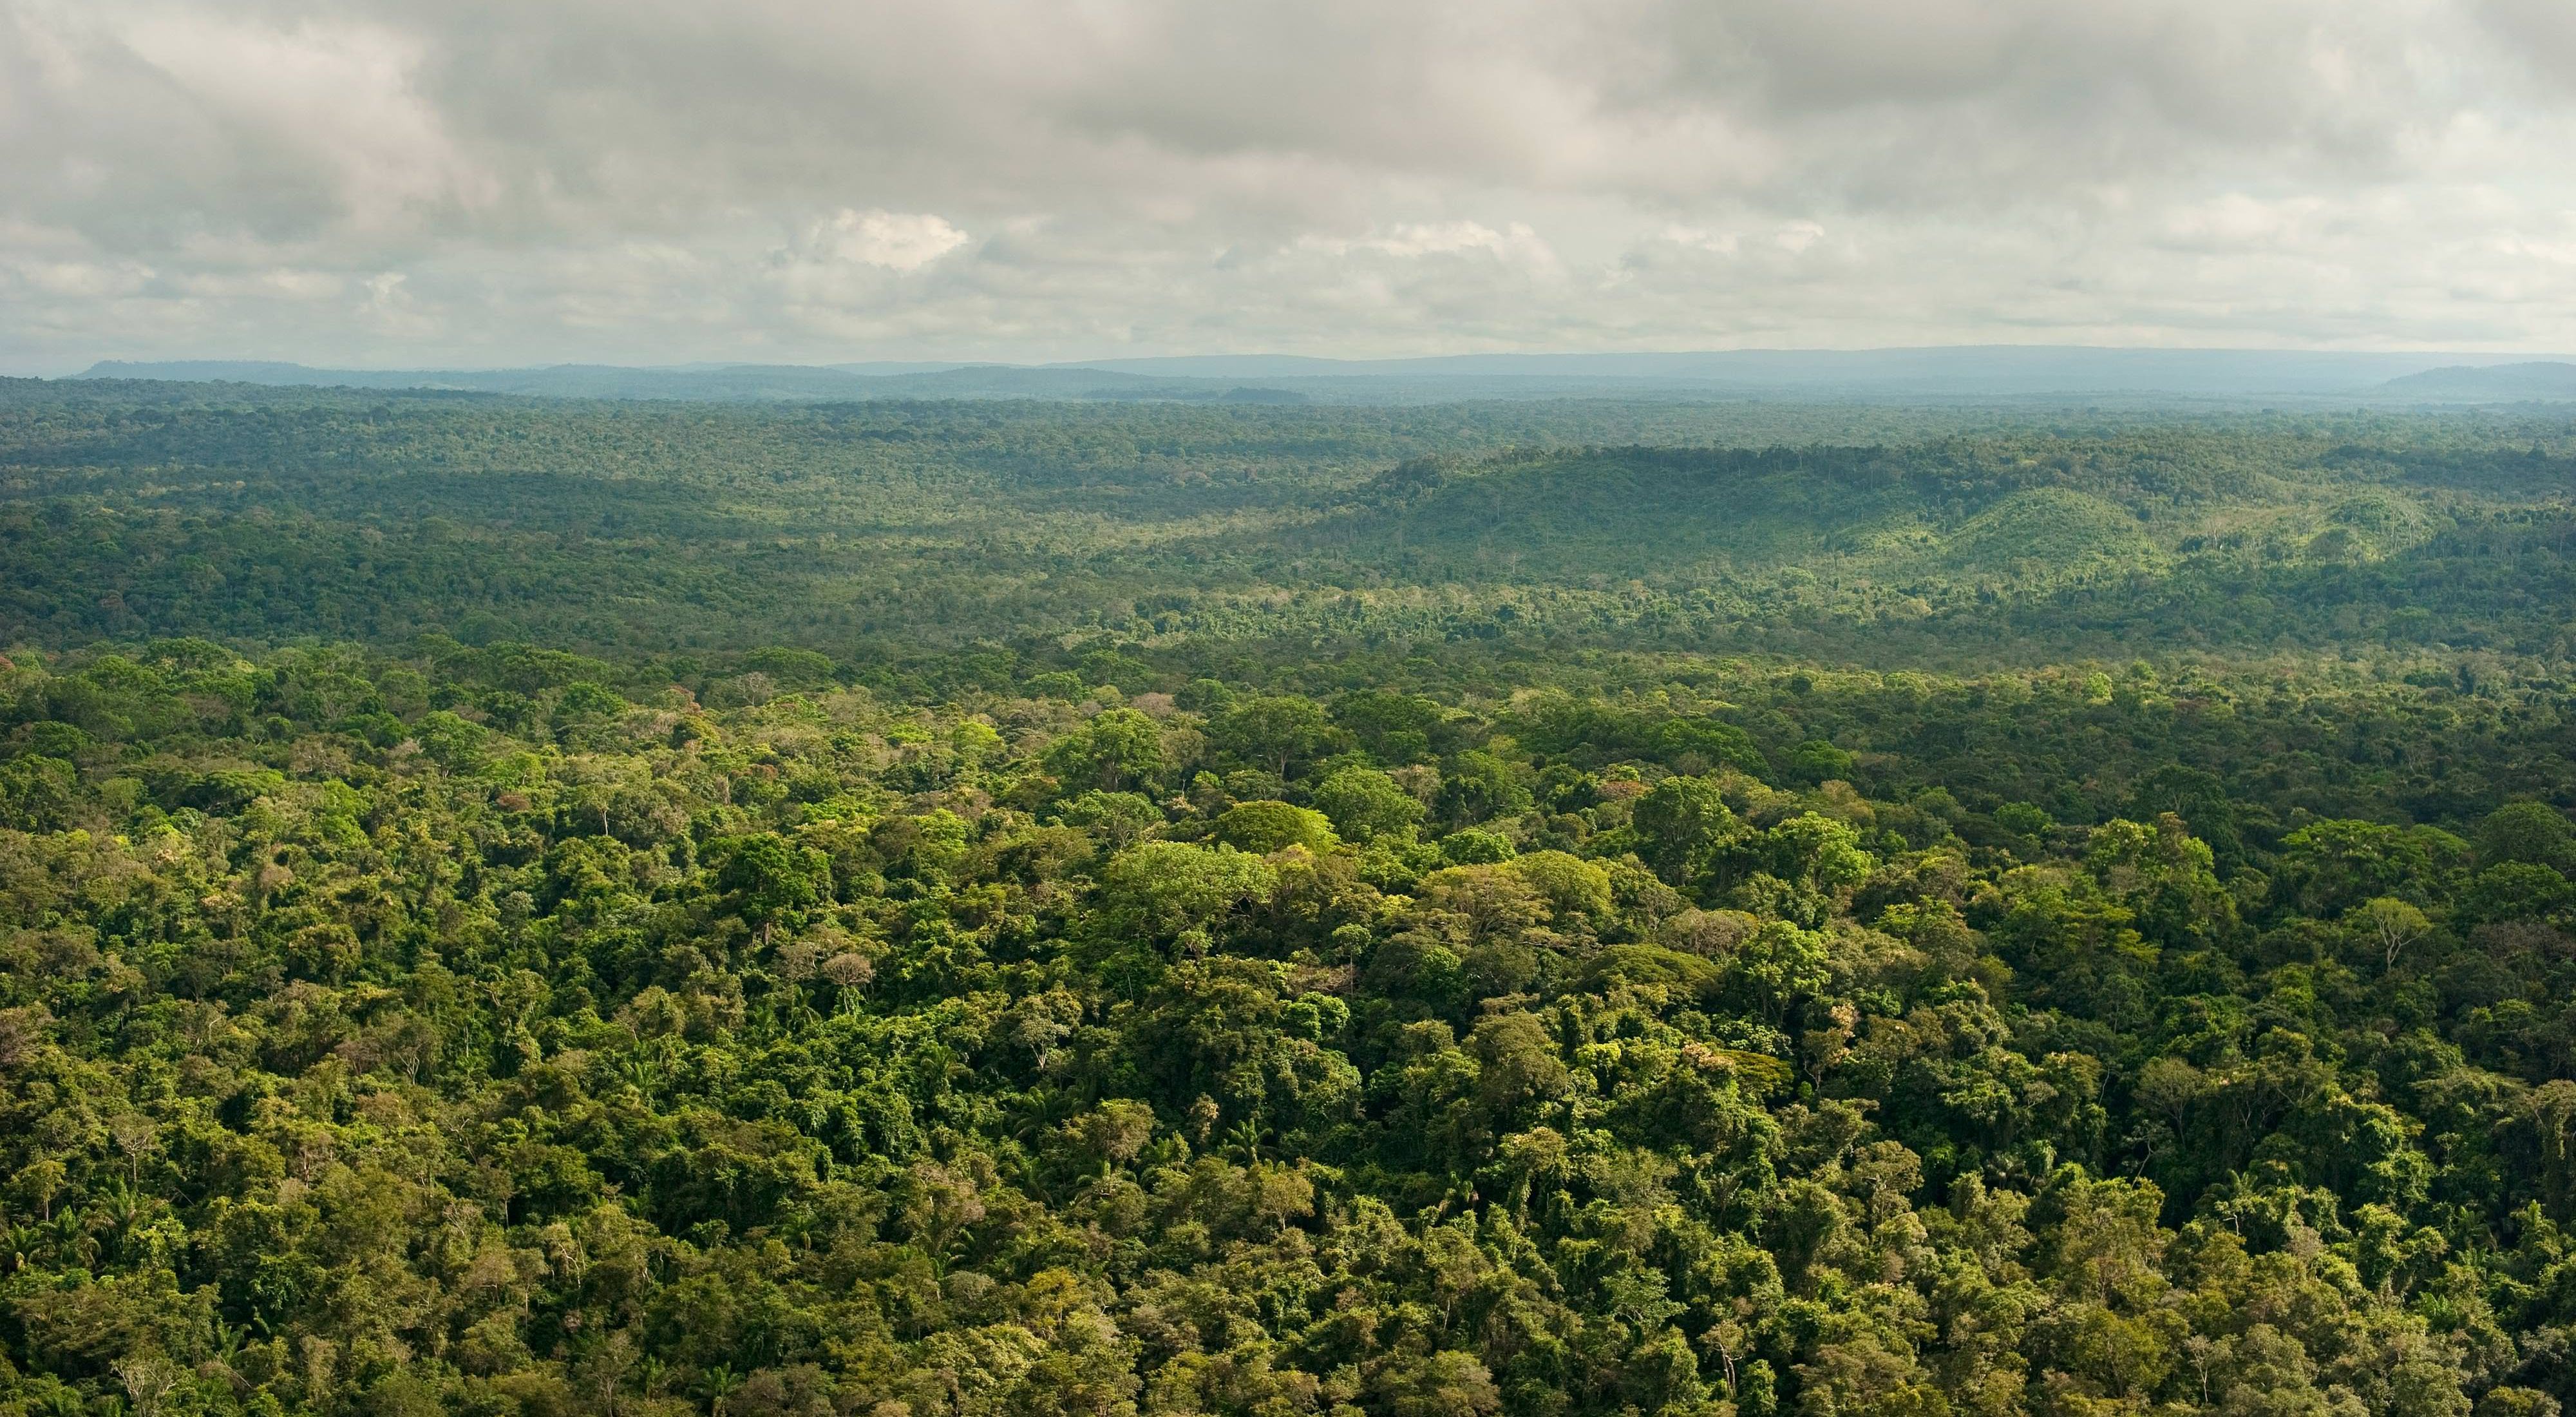 An aerial view of a portion of the remaining Amazon rainforest at São Félix do Xingu, a municipality that has one of the highest rates of deforestation in the country.